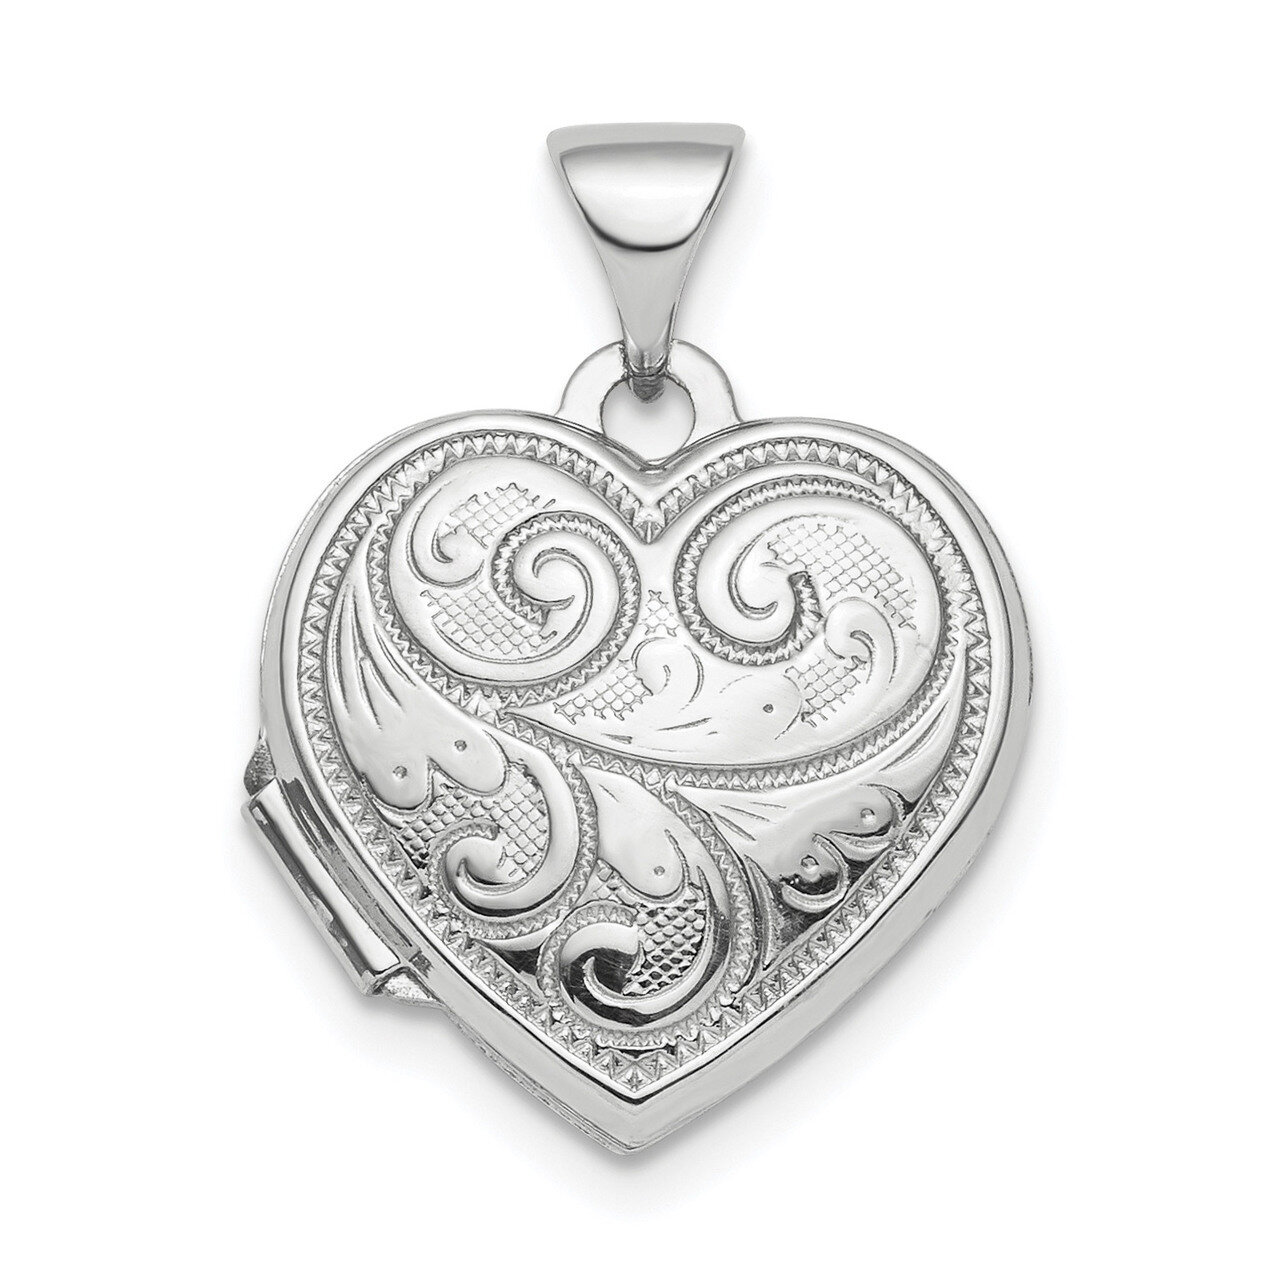 15mm Heart Patterned Locket Sterling Silver Rhodium-plated Polished QLS809